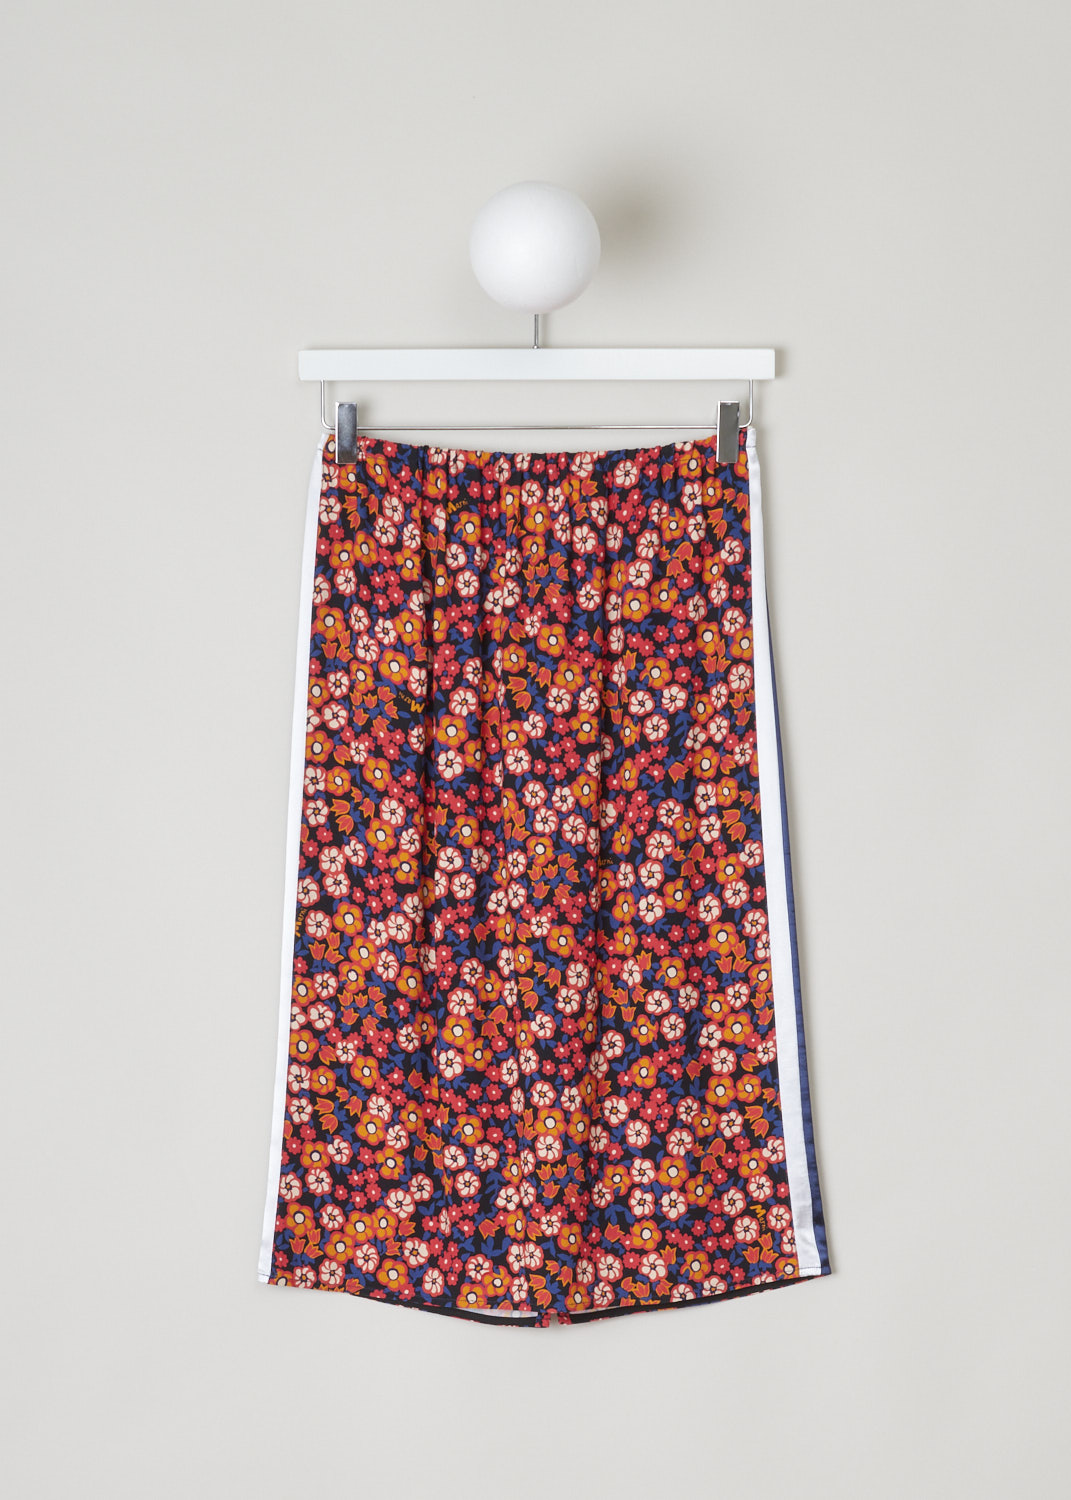 Marni, Red and blue floral pencil skirt, GOMA0348Q0_UTV823_PGN99, red blue white, front, Red pencil skirt embellished with a red and blue floral design, the side seam of this skirt comes adorned with blue and white stripes along the whole length. The closure method of this skirt comes win the form of an elastic waistband.